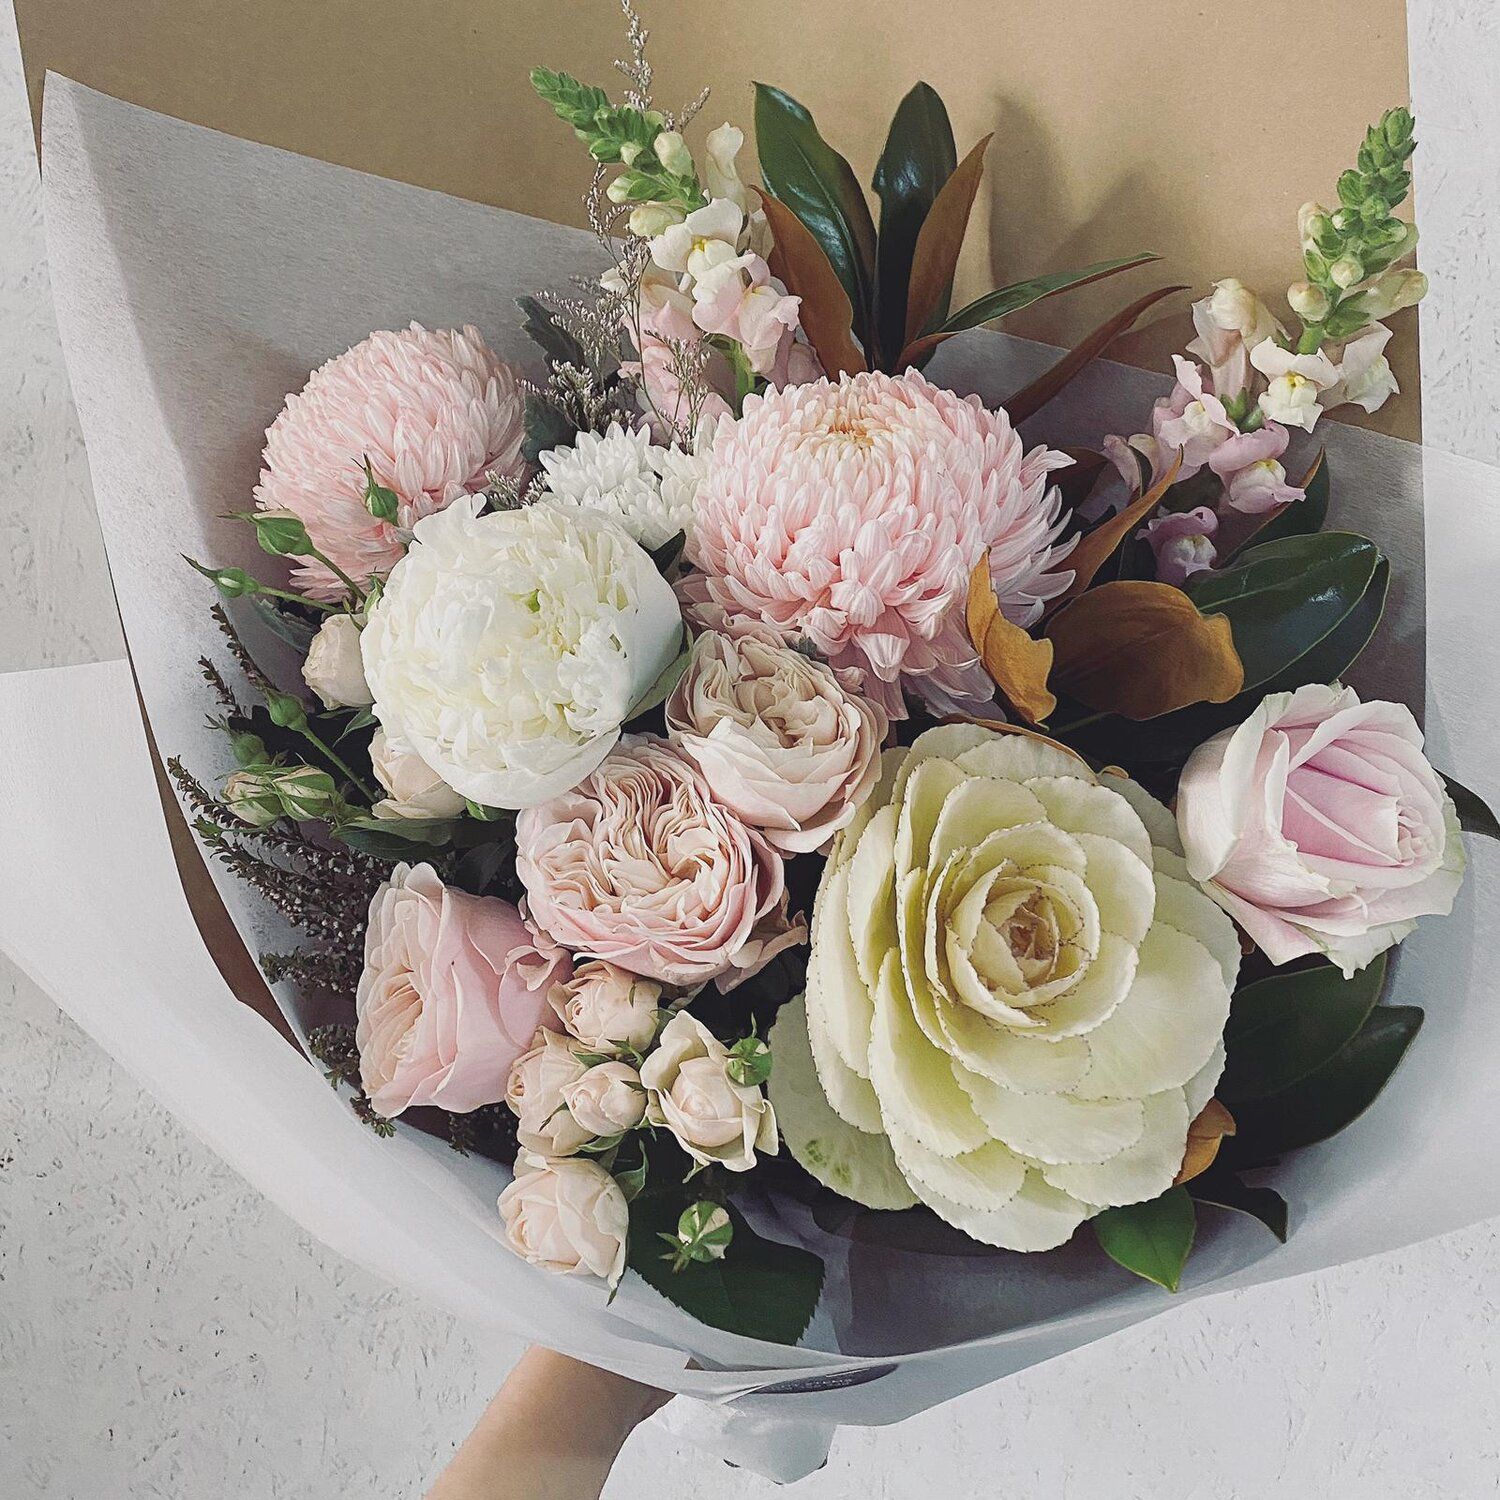 12 Awesome Reasons To Give Flowers To Someone You Love